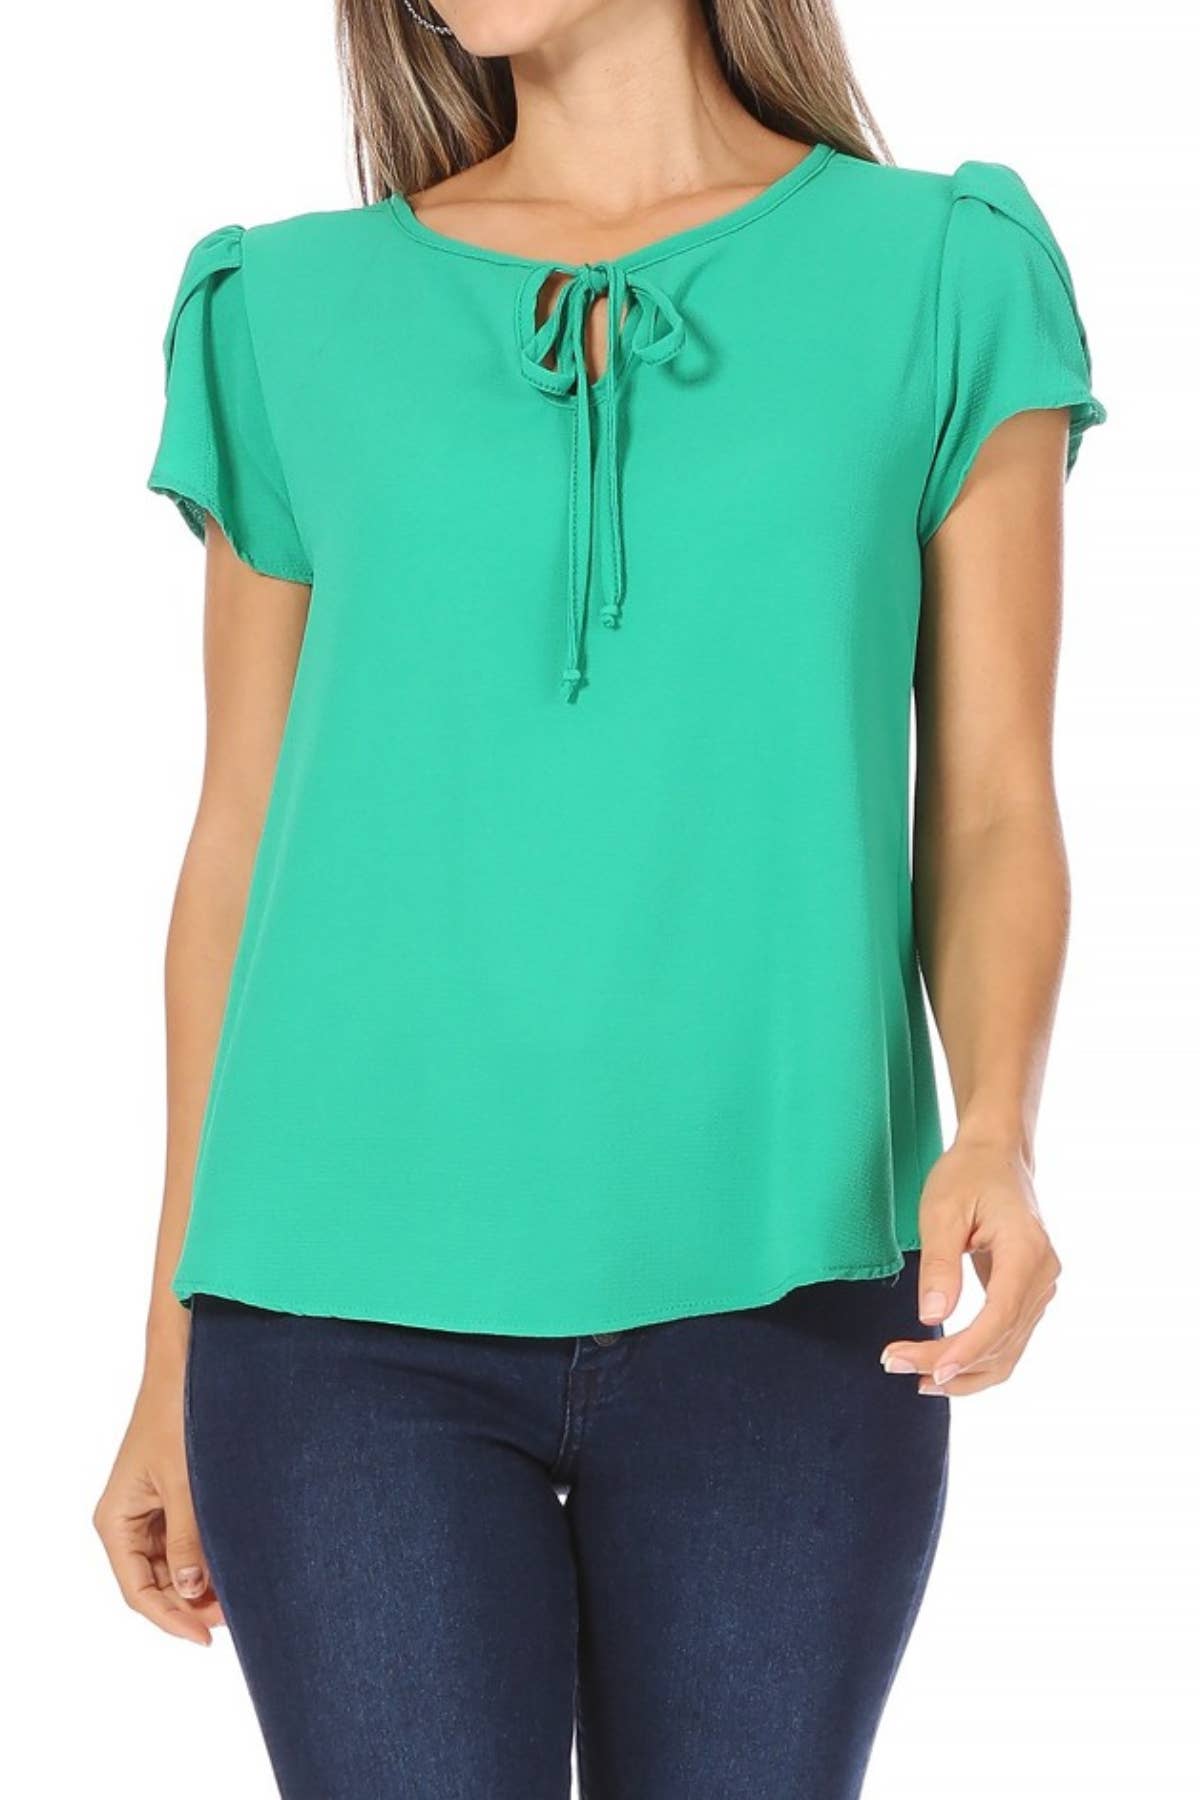 Women's Casual Solid Sleeve Tie Round Neck Blouse Top: Small / Green